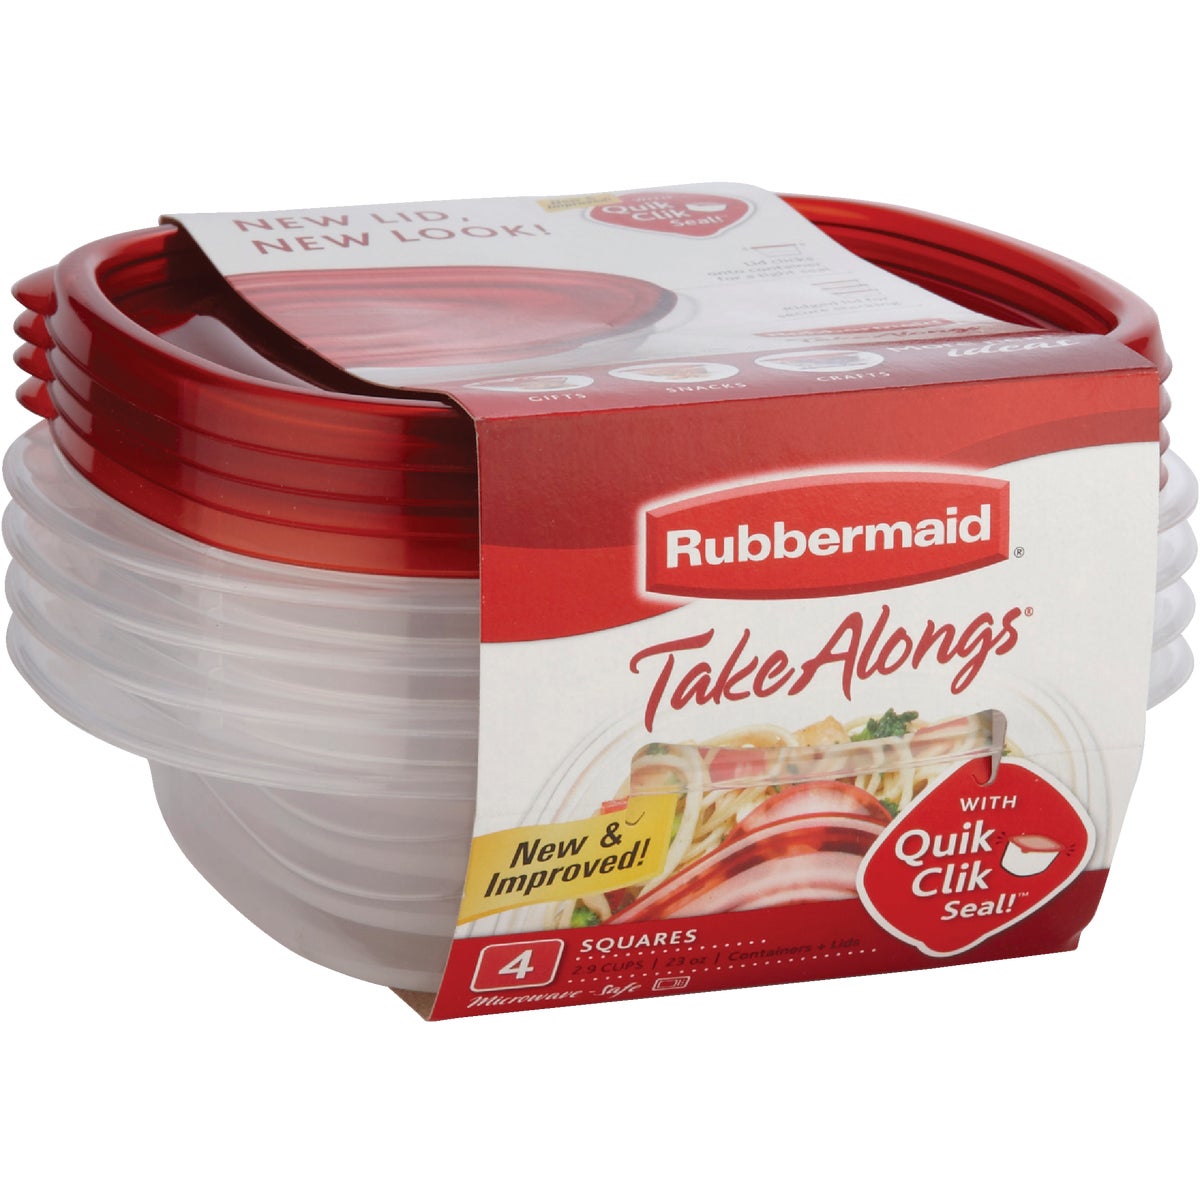 Rubbermaid 4Pc Sandwich Containers 71691463610 | eBay